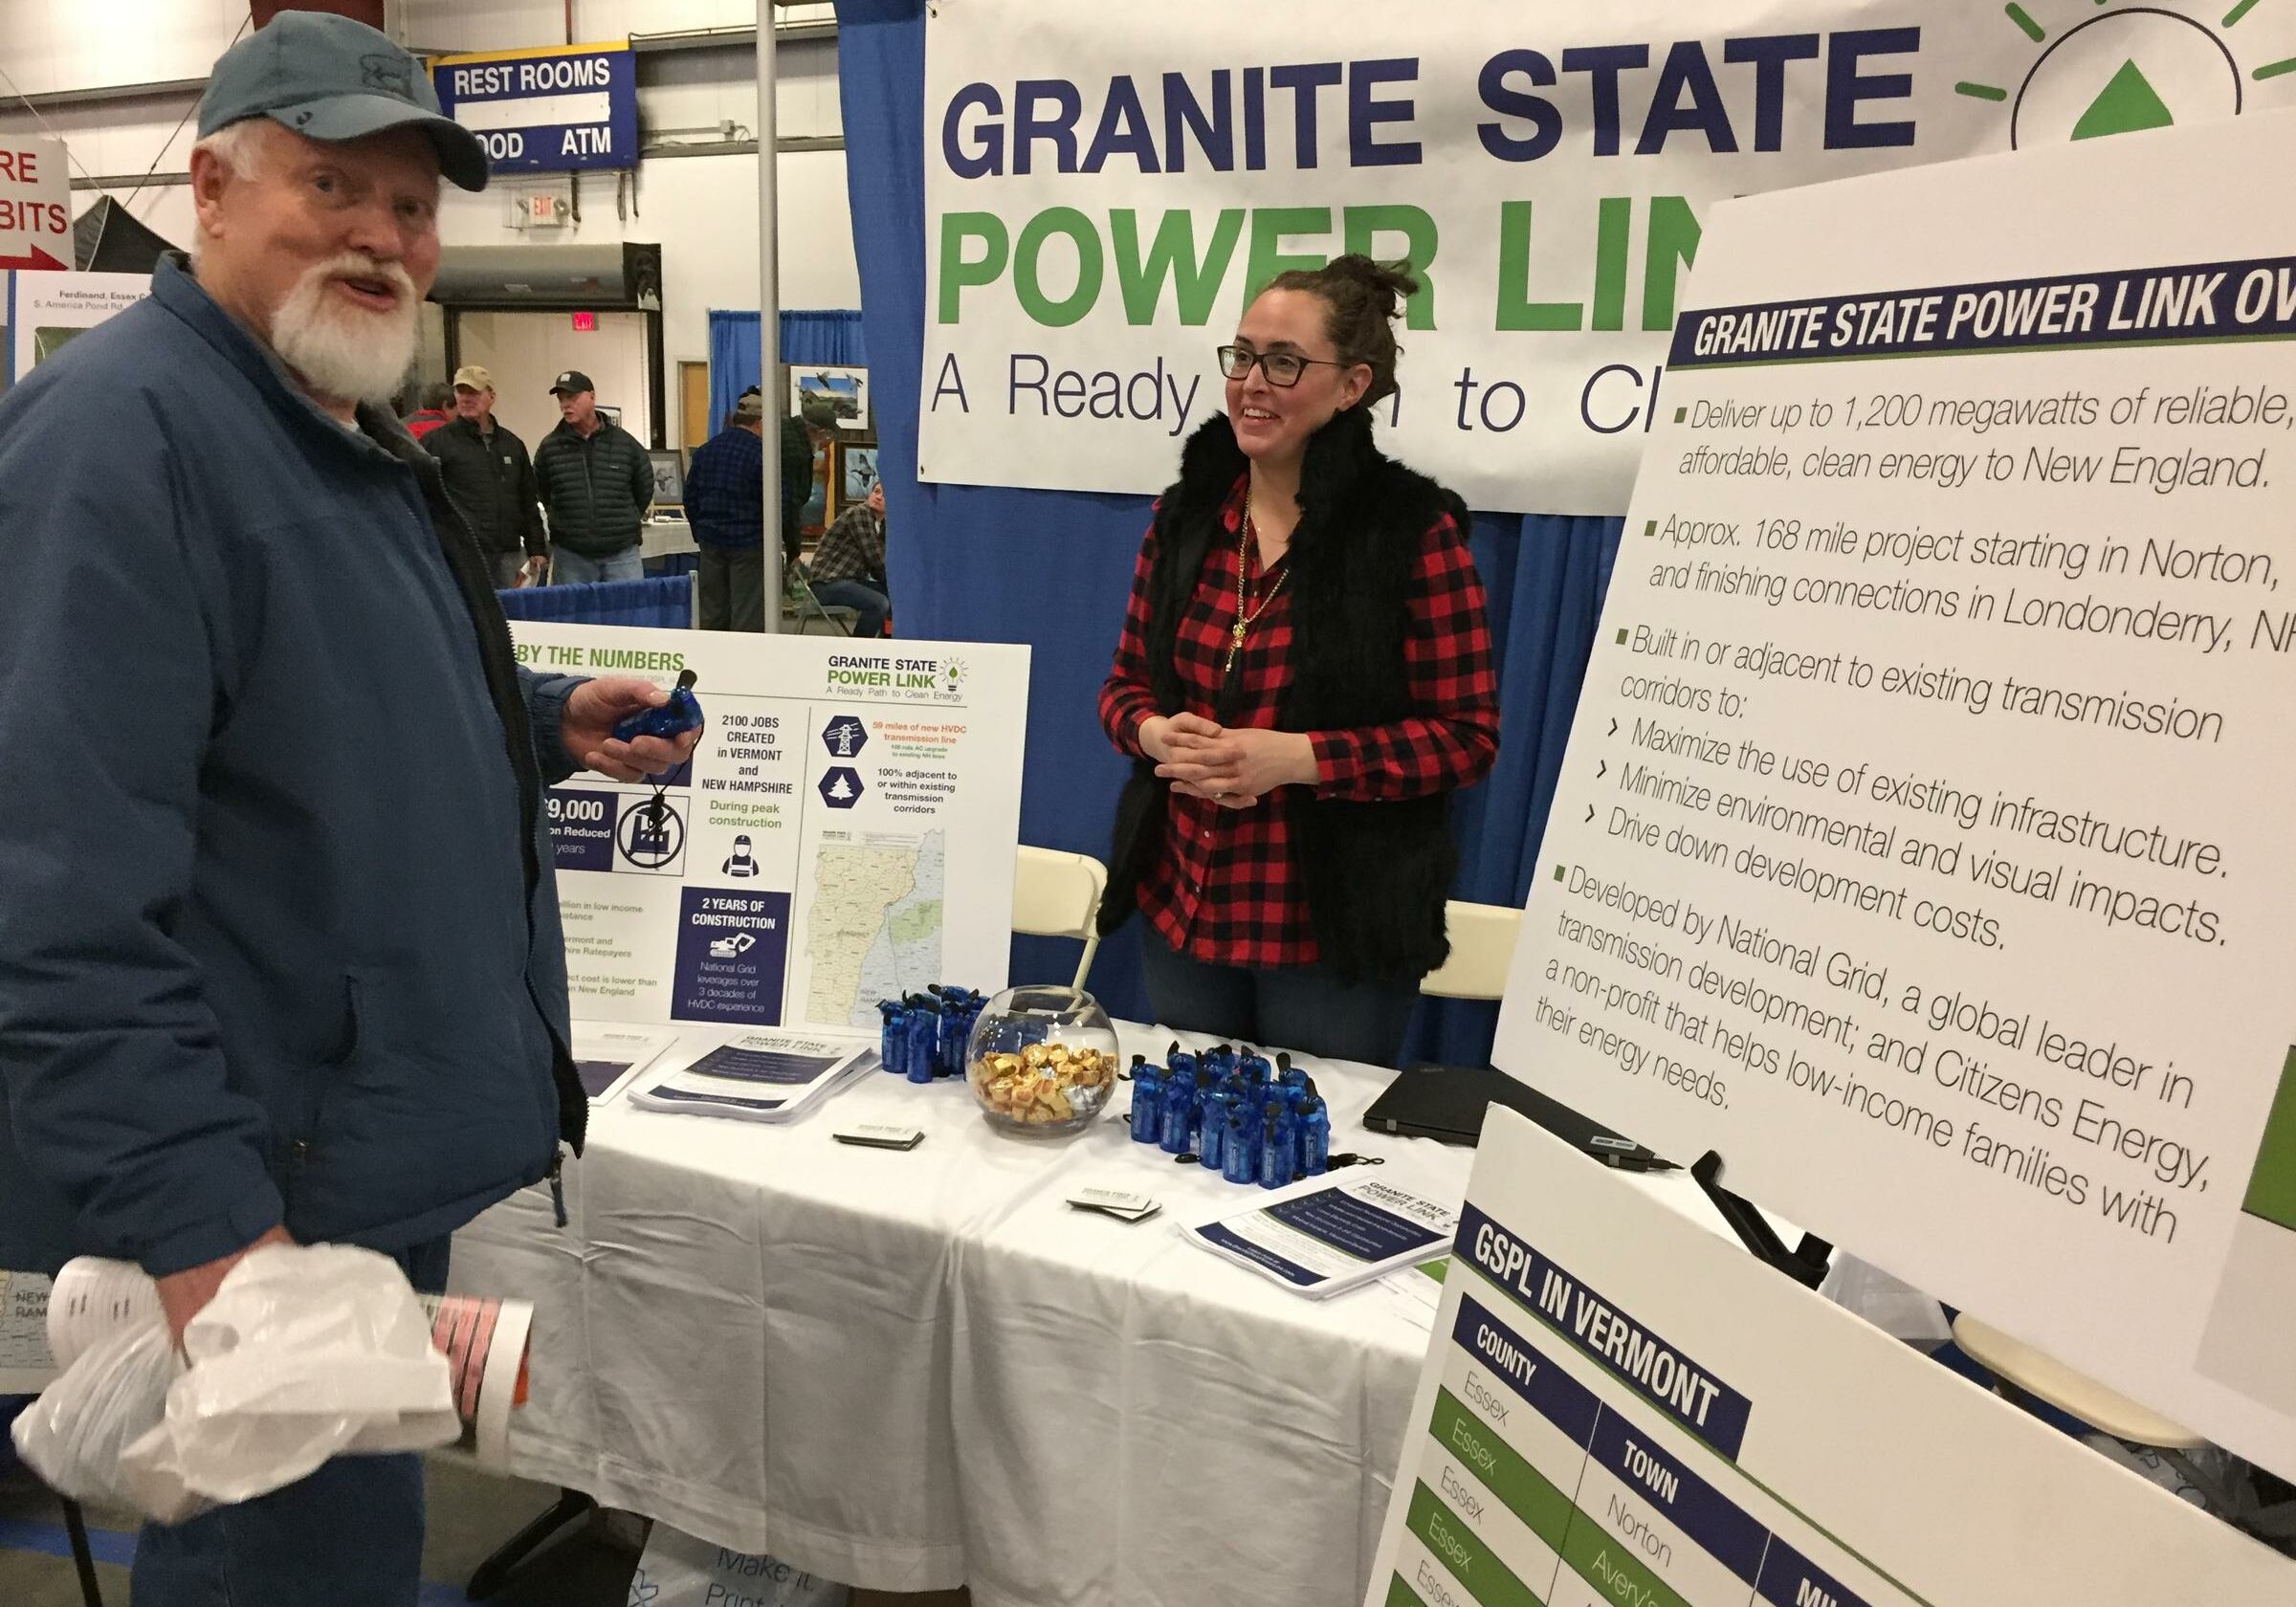 As part of its outreach, National Grid and its Granite State Power Link sponsored the Yankee Sportsman's Classic, an annual show that draws 15,000 for exhibits and workshops on hunting and angling. Photo by John Dillon for VPR
